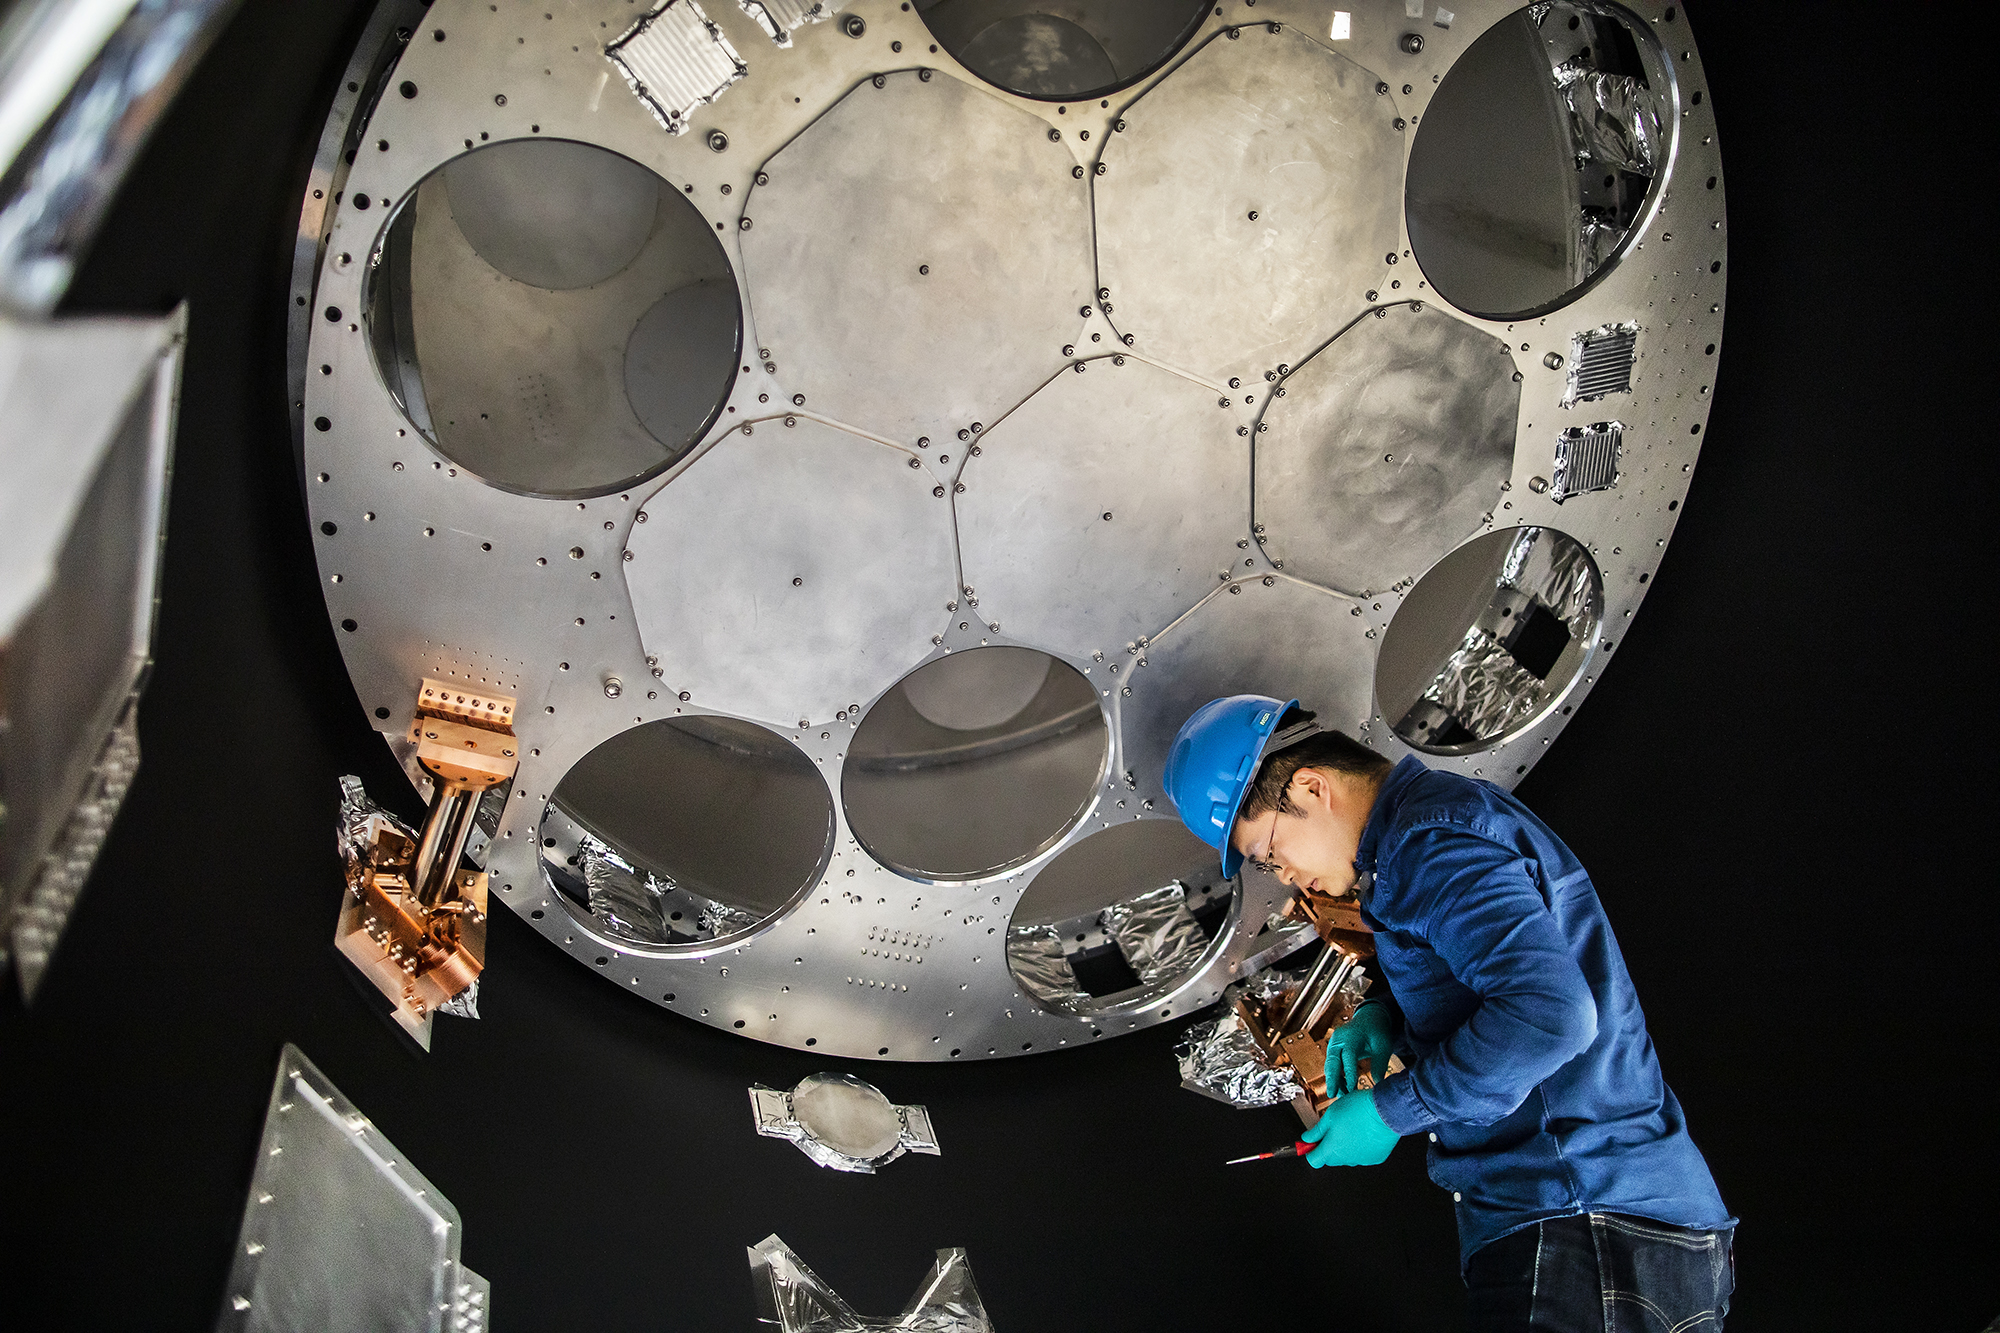 a person in a hard had working inside a large telescope detector